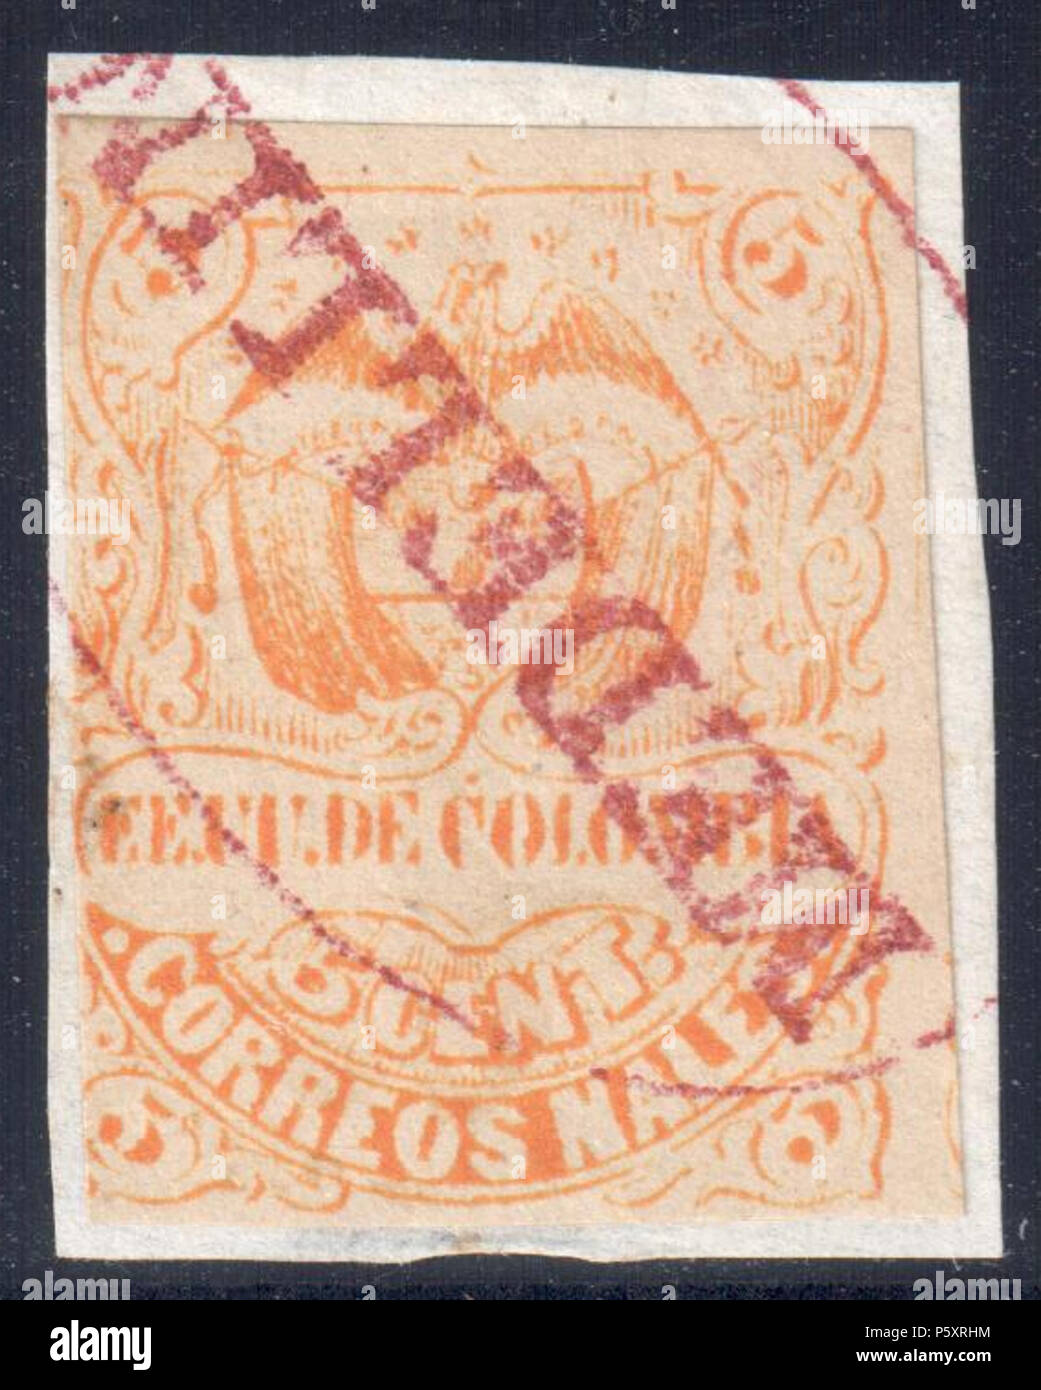 N/A. English: Colombia 1870 5c orange, tied to small fragment by red 'MEDELLÍN' cancel. Catalogue: Sc. 62, Mi. 59 Paper: White wove unwtmk Perforation: imperforated Printing: Lithography Printer: Ayala Medrano Printing Ltd, Bogota . 1870. Colombian government 367 Colombia 1870 Sc62 Stock Photo